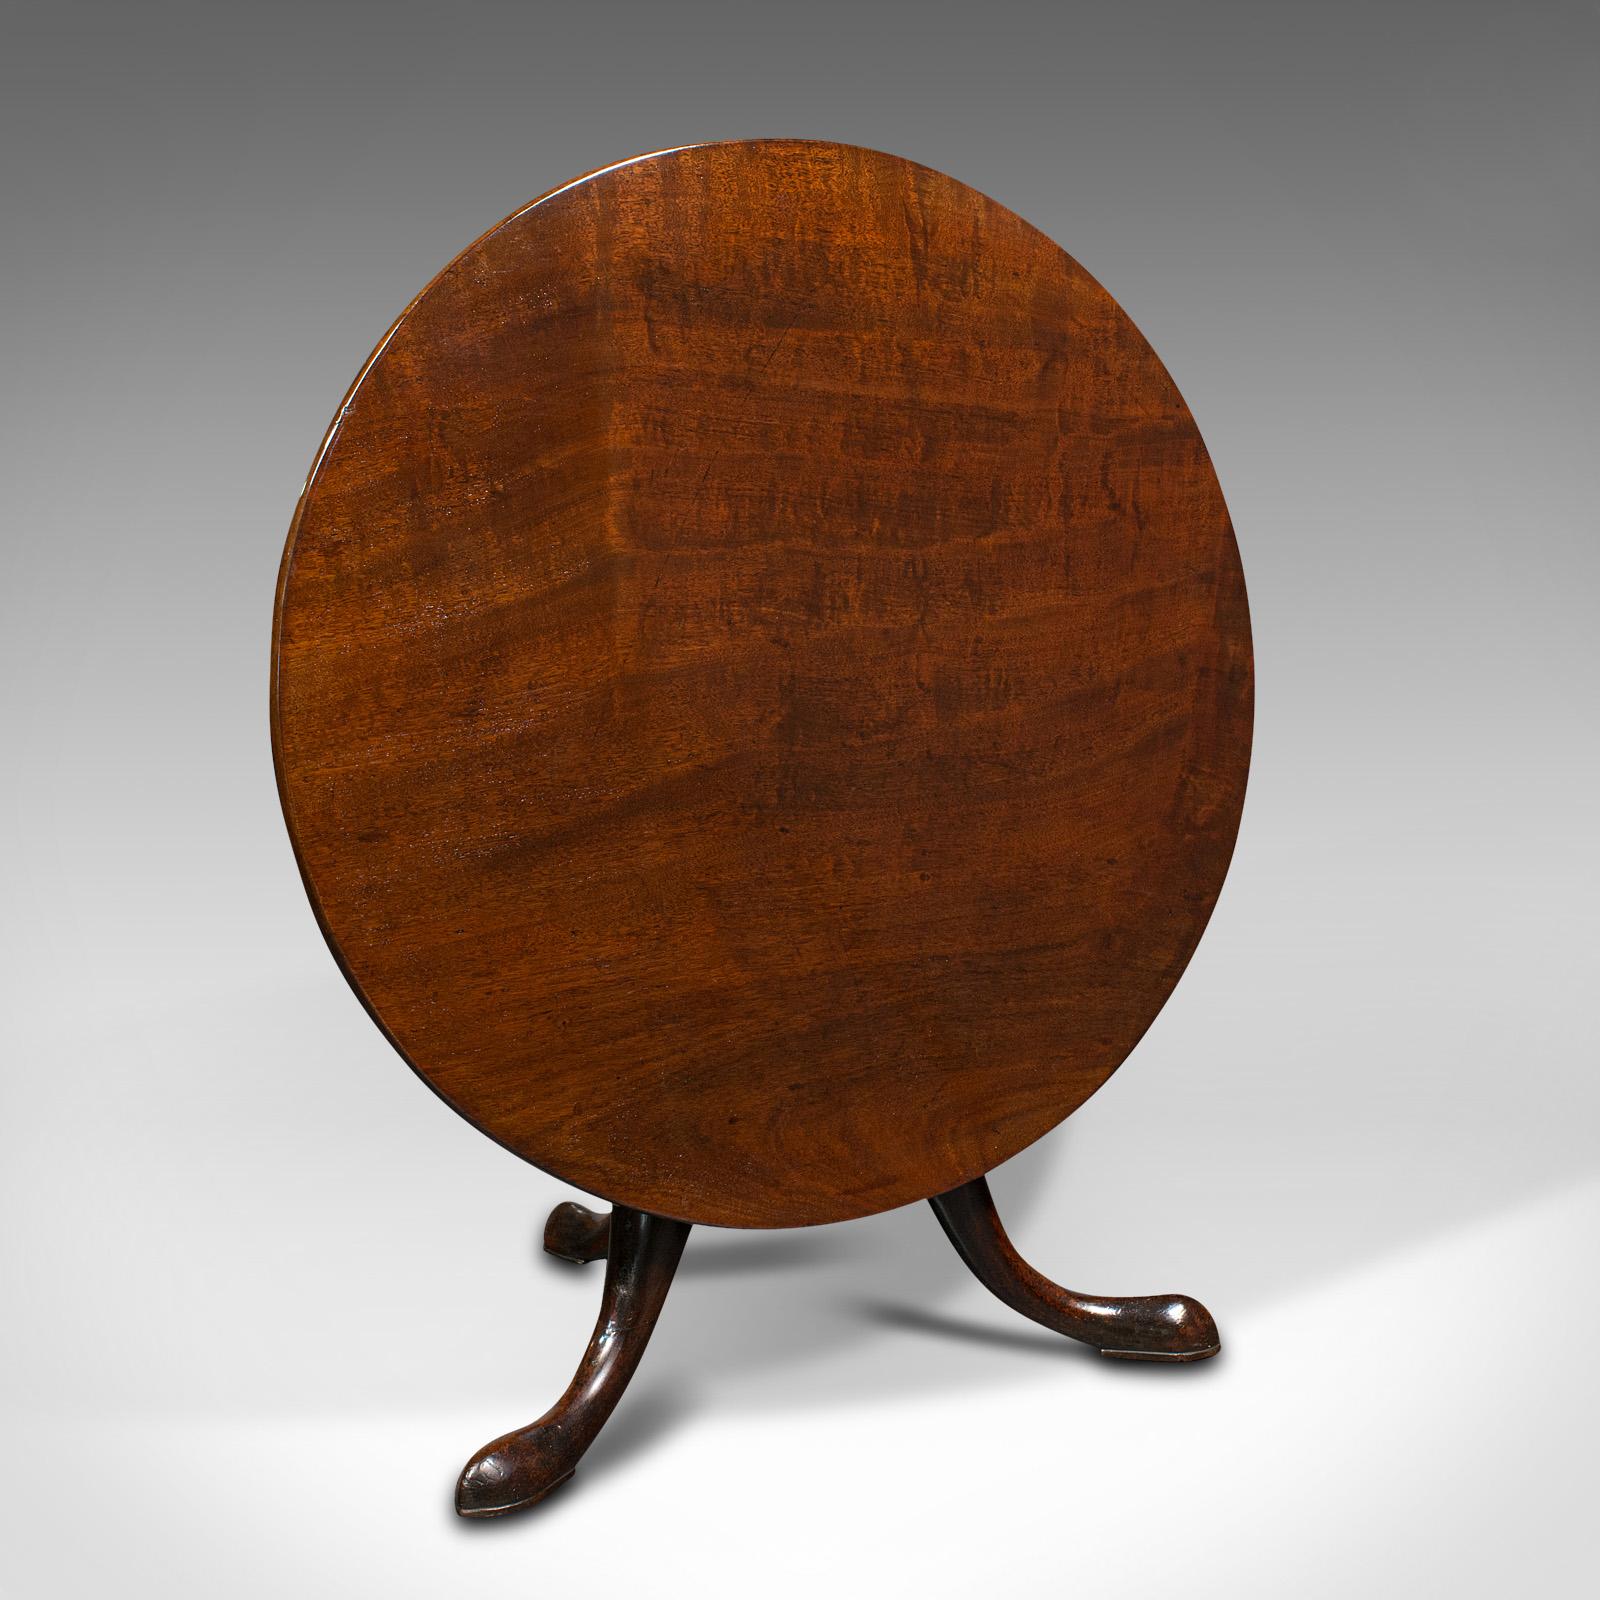 This is an antique tilt top side table. An English, mahogany low wine or afternoon tea table, dating to the early Georgian period, circa 1750.

Beautifully presented Georgian table of low proportion
Displays a desirable aged patina and in good